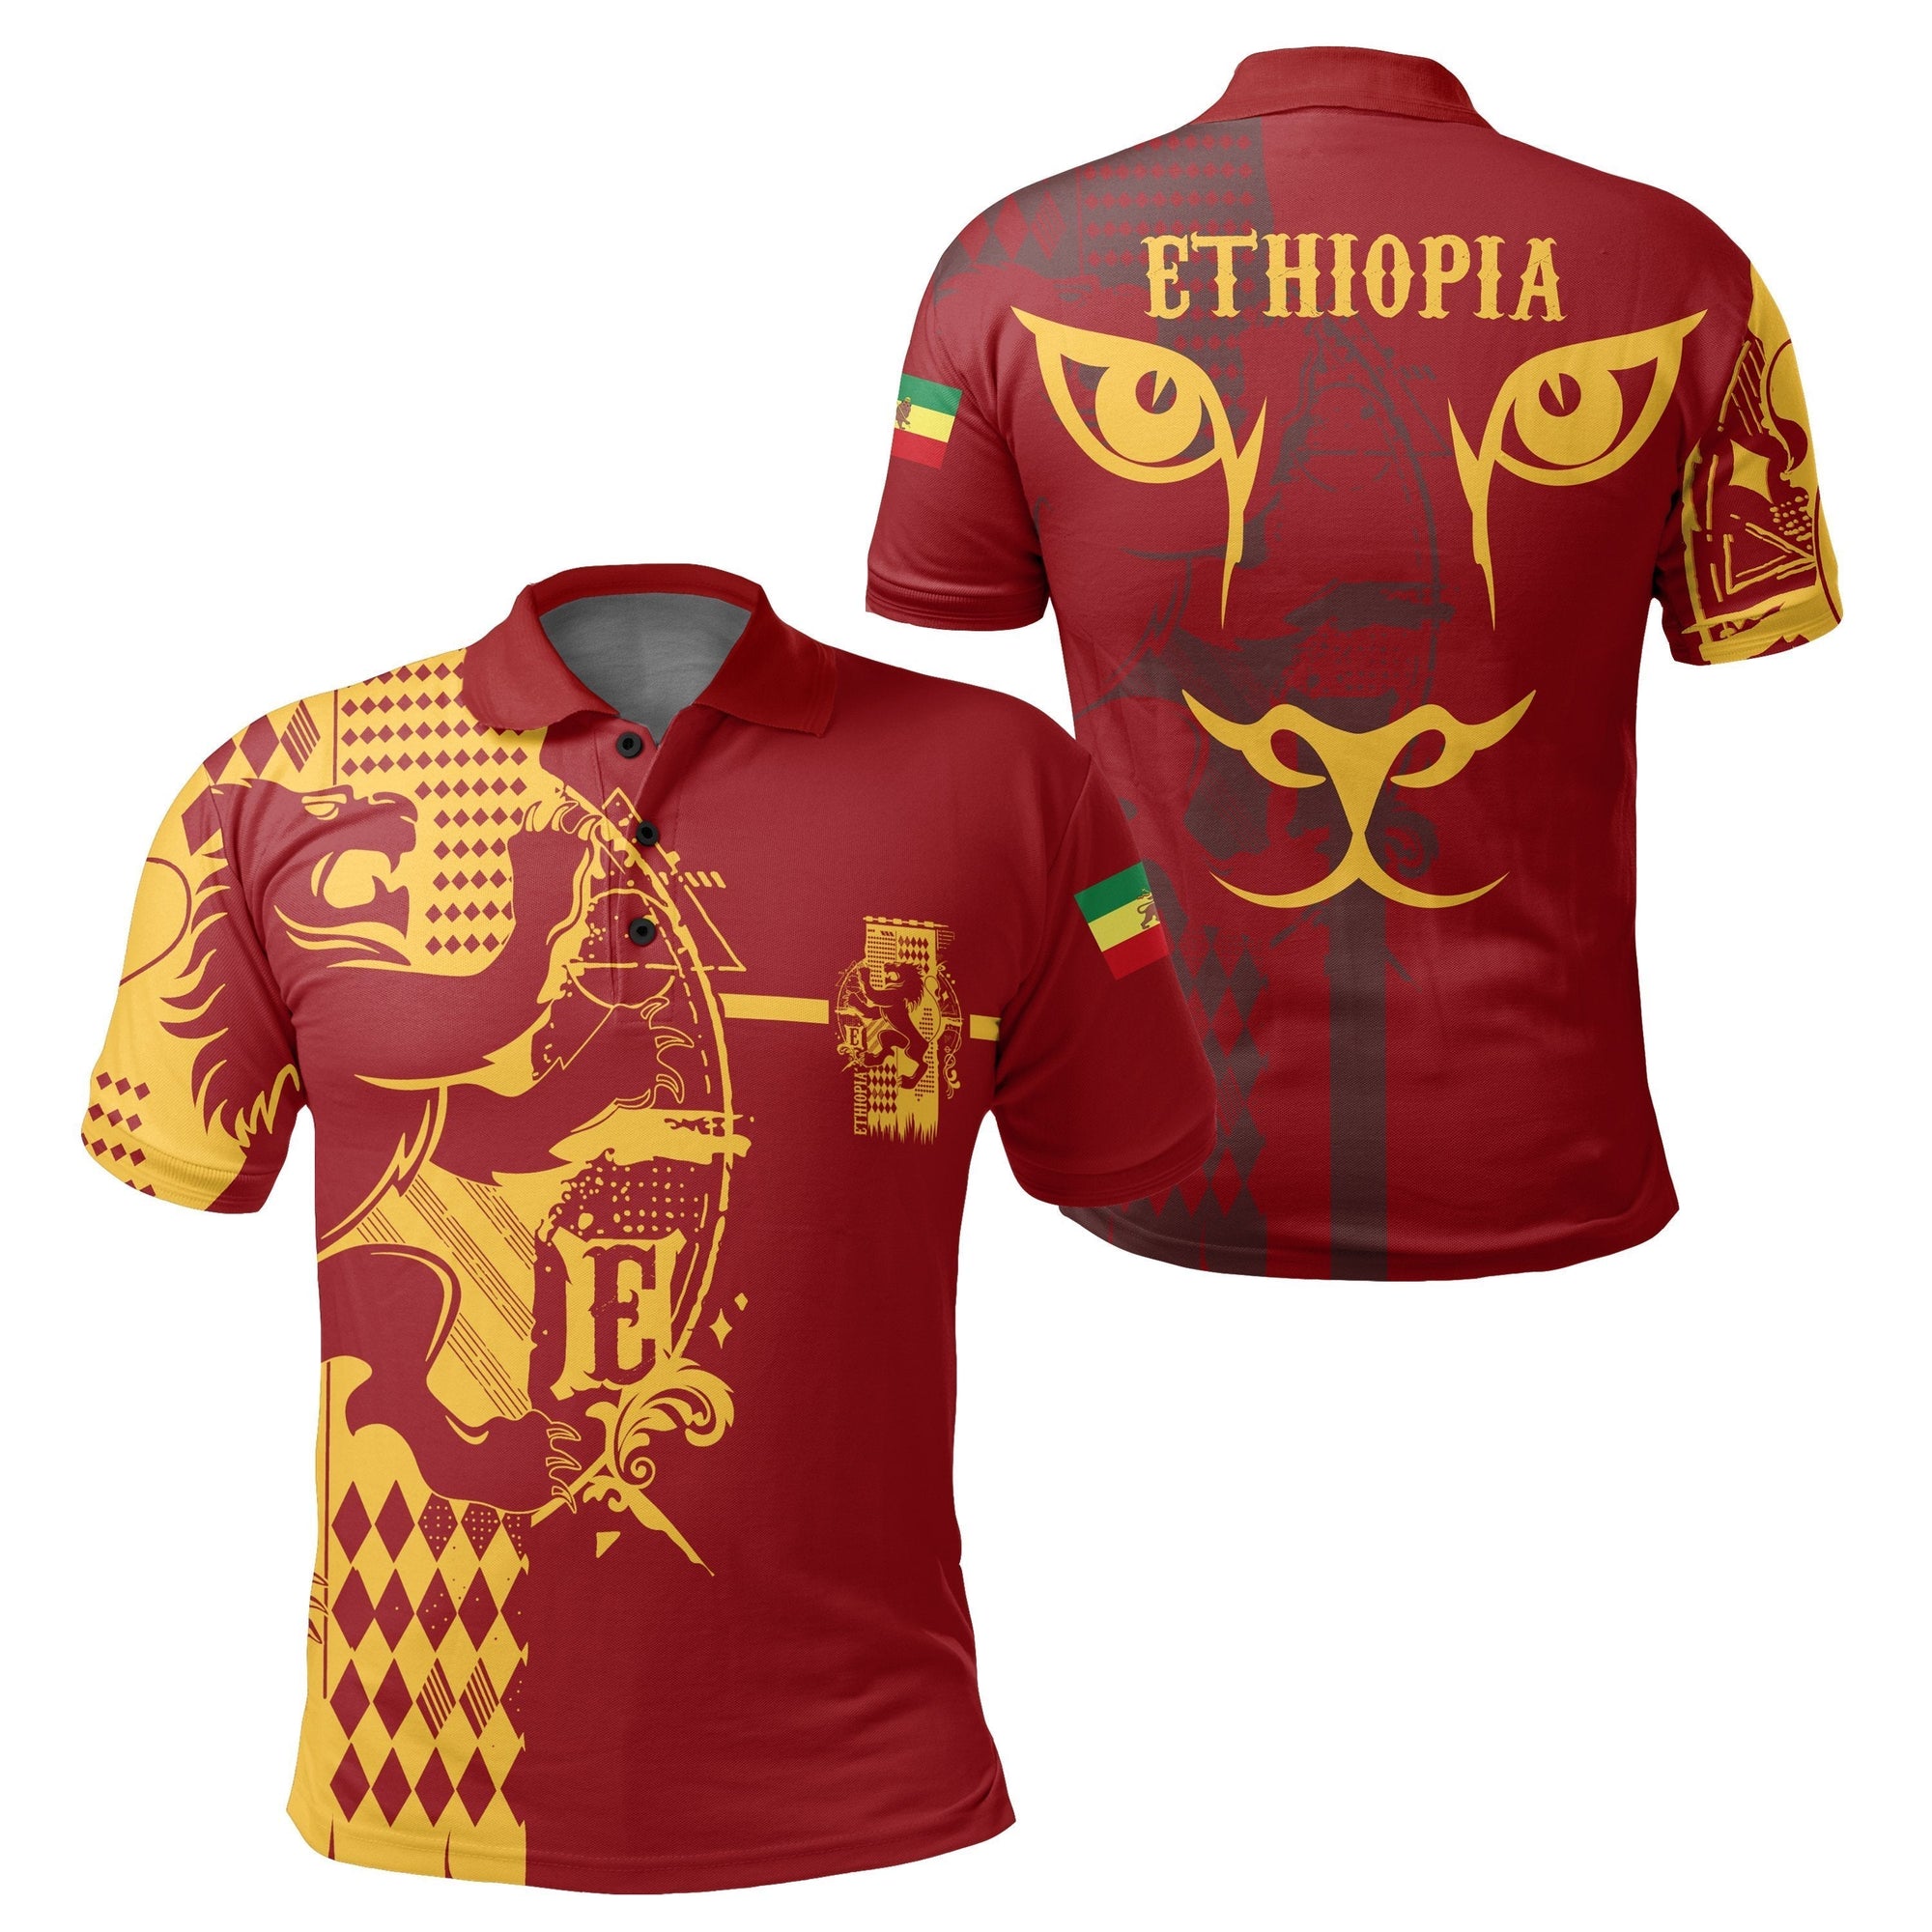 african-shirt-ethiopia-king-of-lion-polo-shirt-red